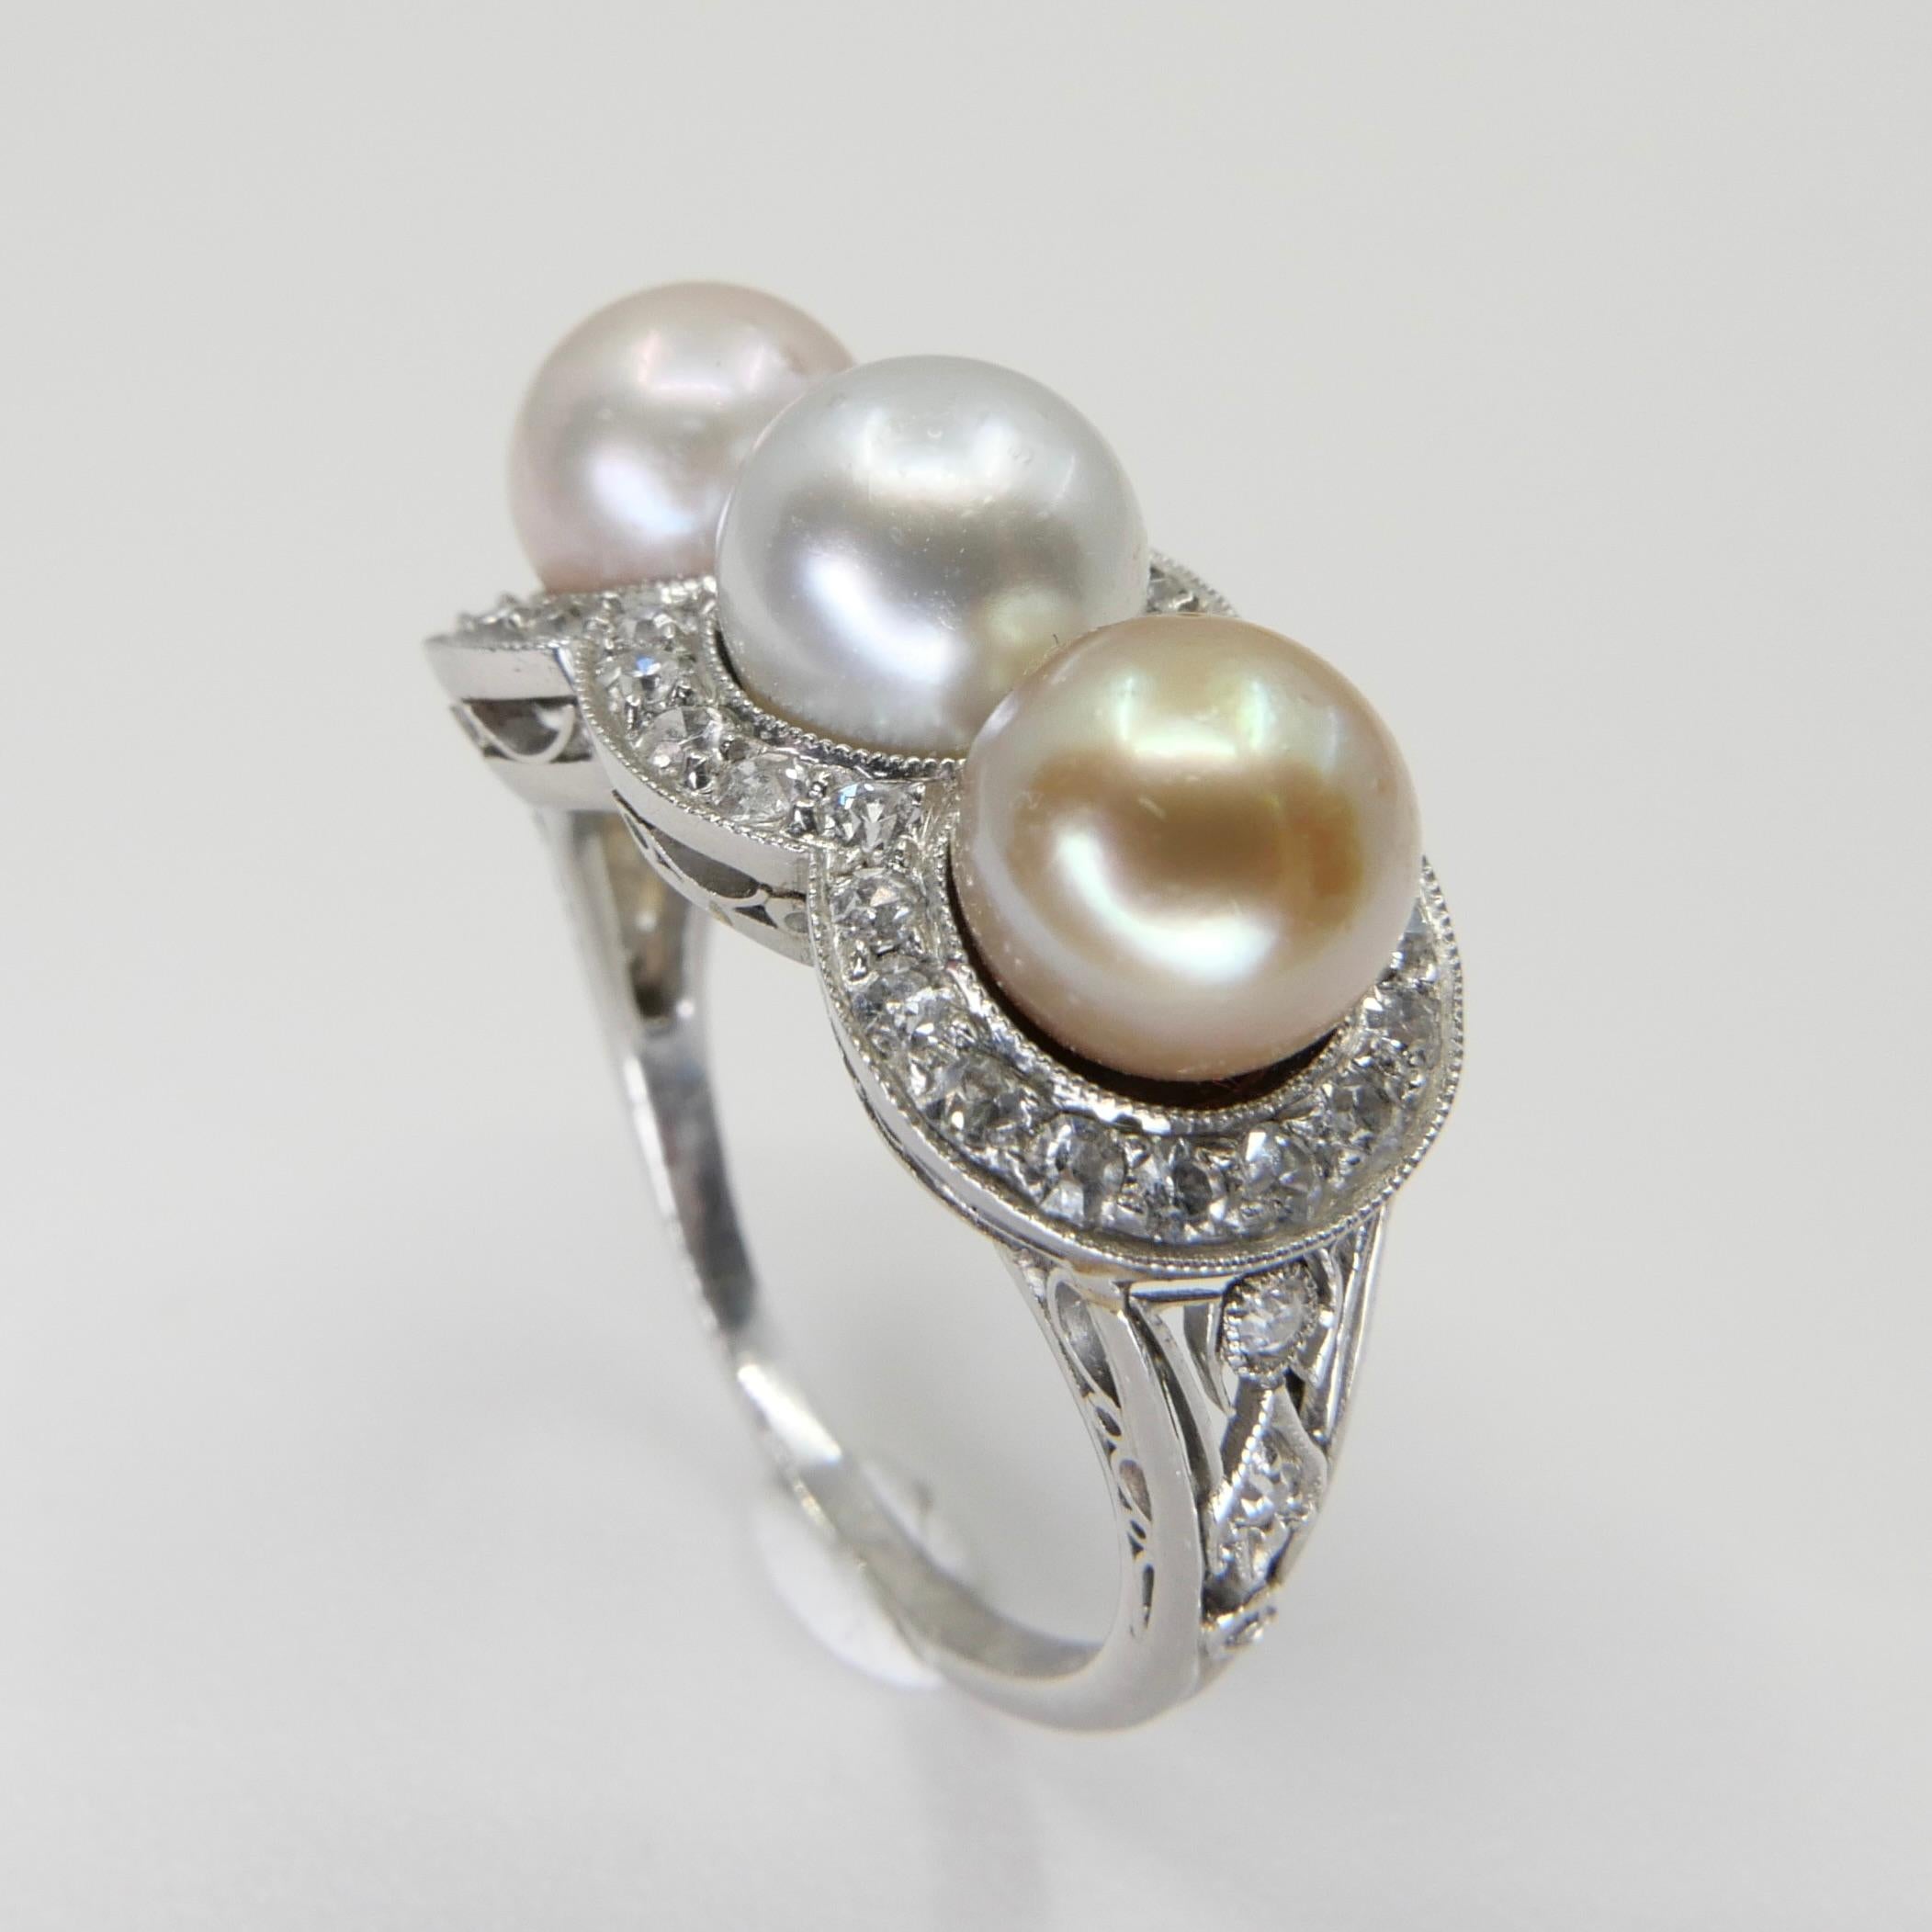 J E Caldwell Belle Epoque Certified 3 Natural Colored Pearls and Diamond Ring 1